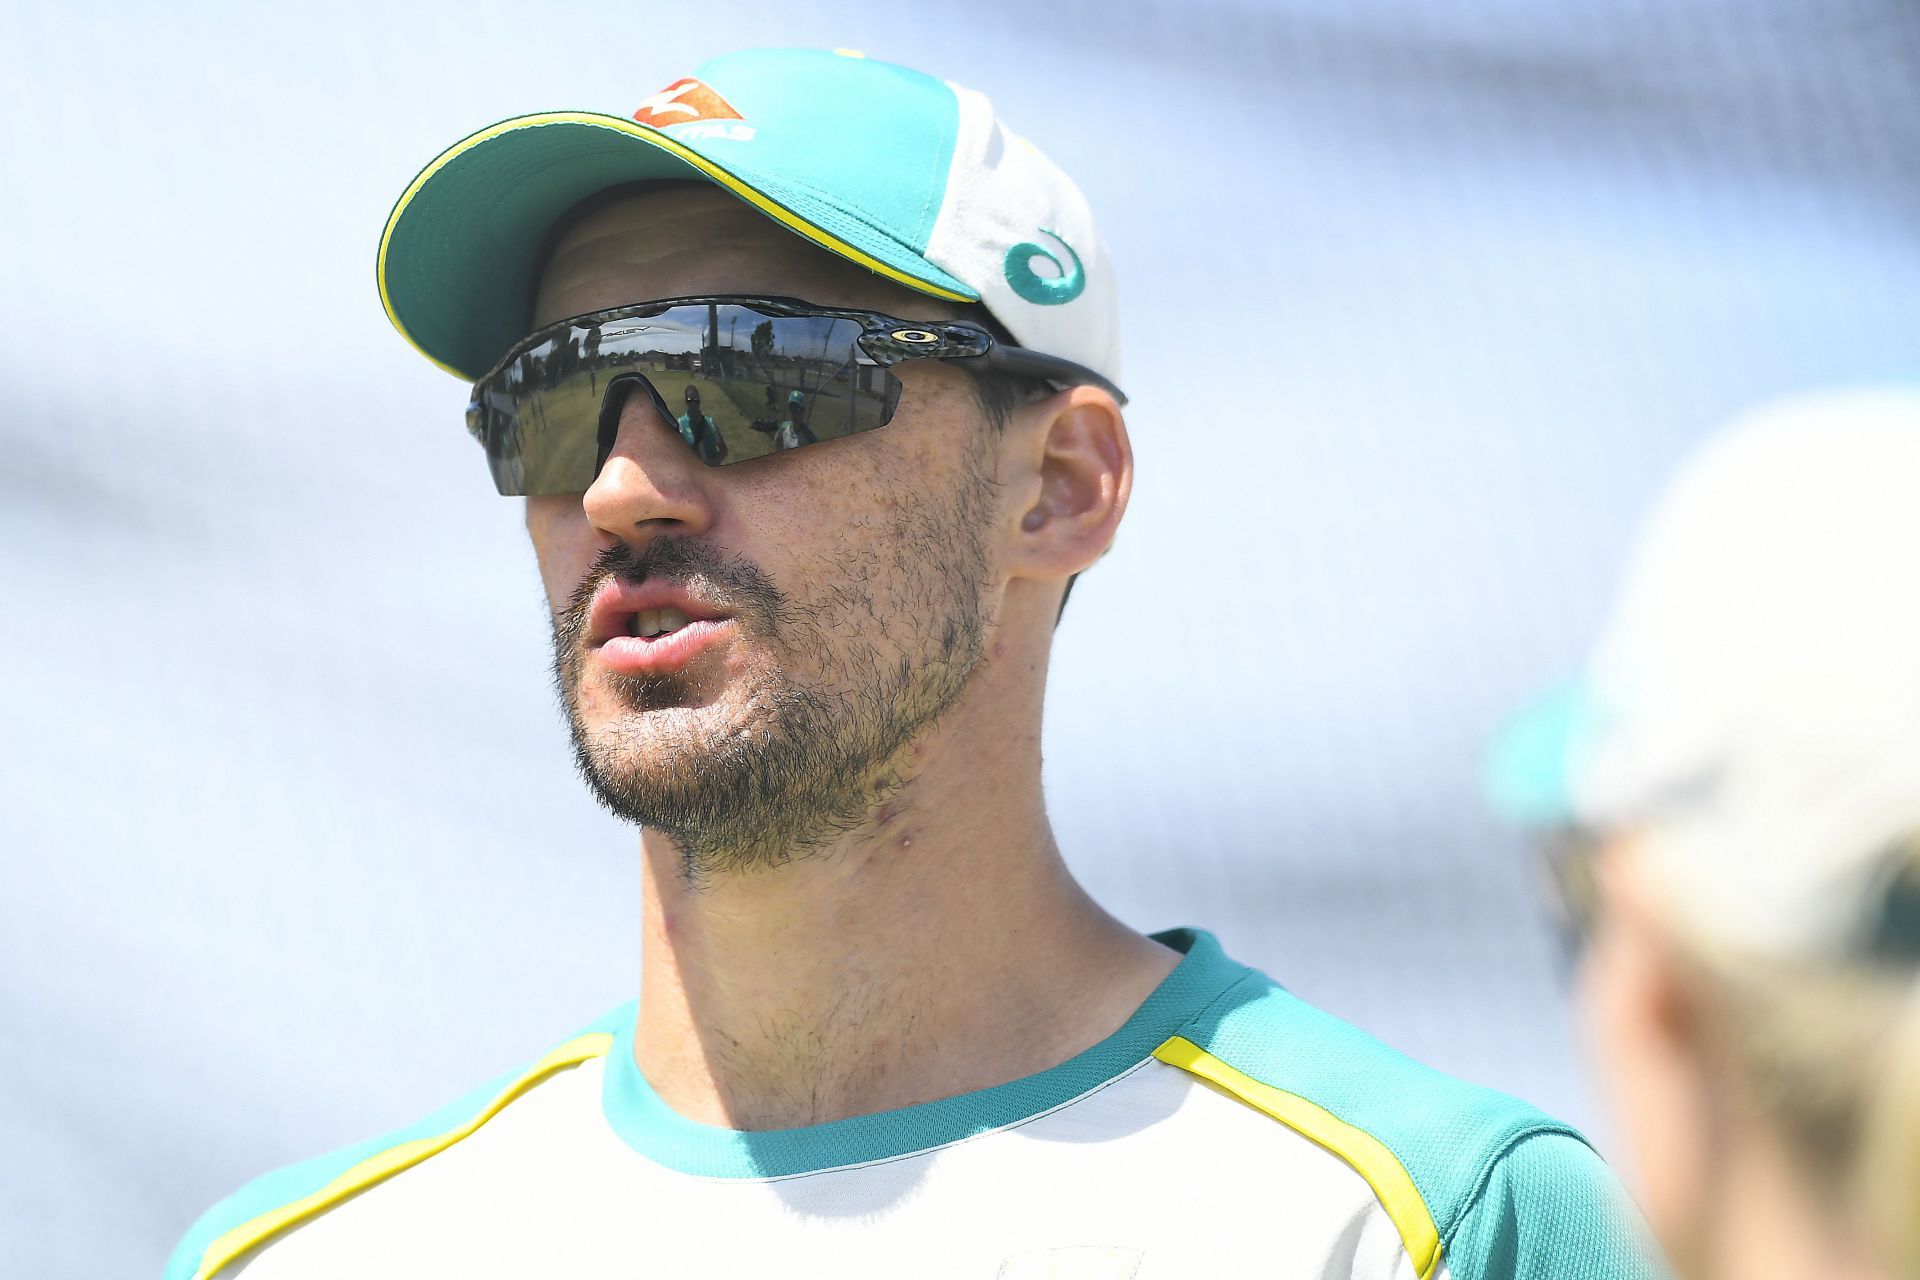 Mitchell Starc suffers a leg injury in training (Credit: Getty Images)